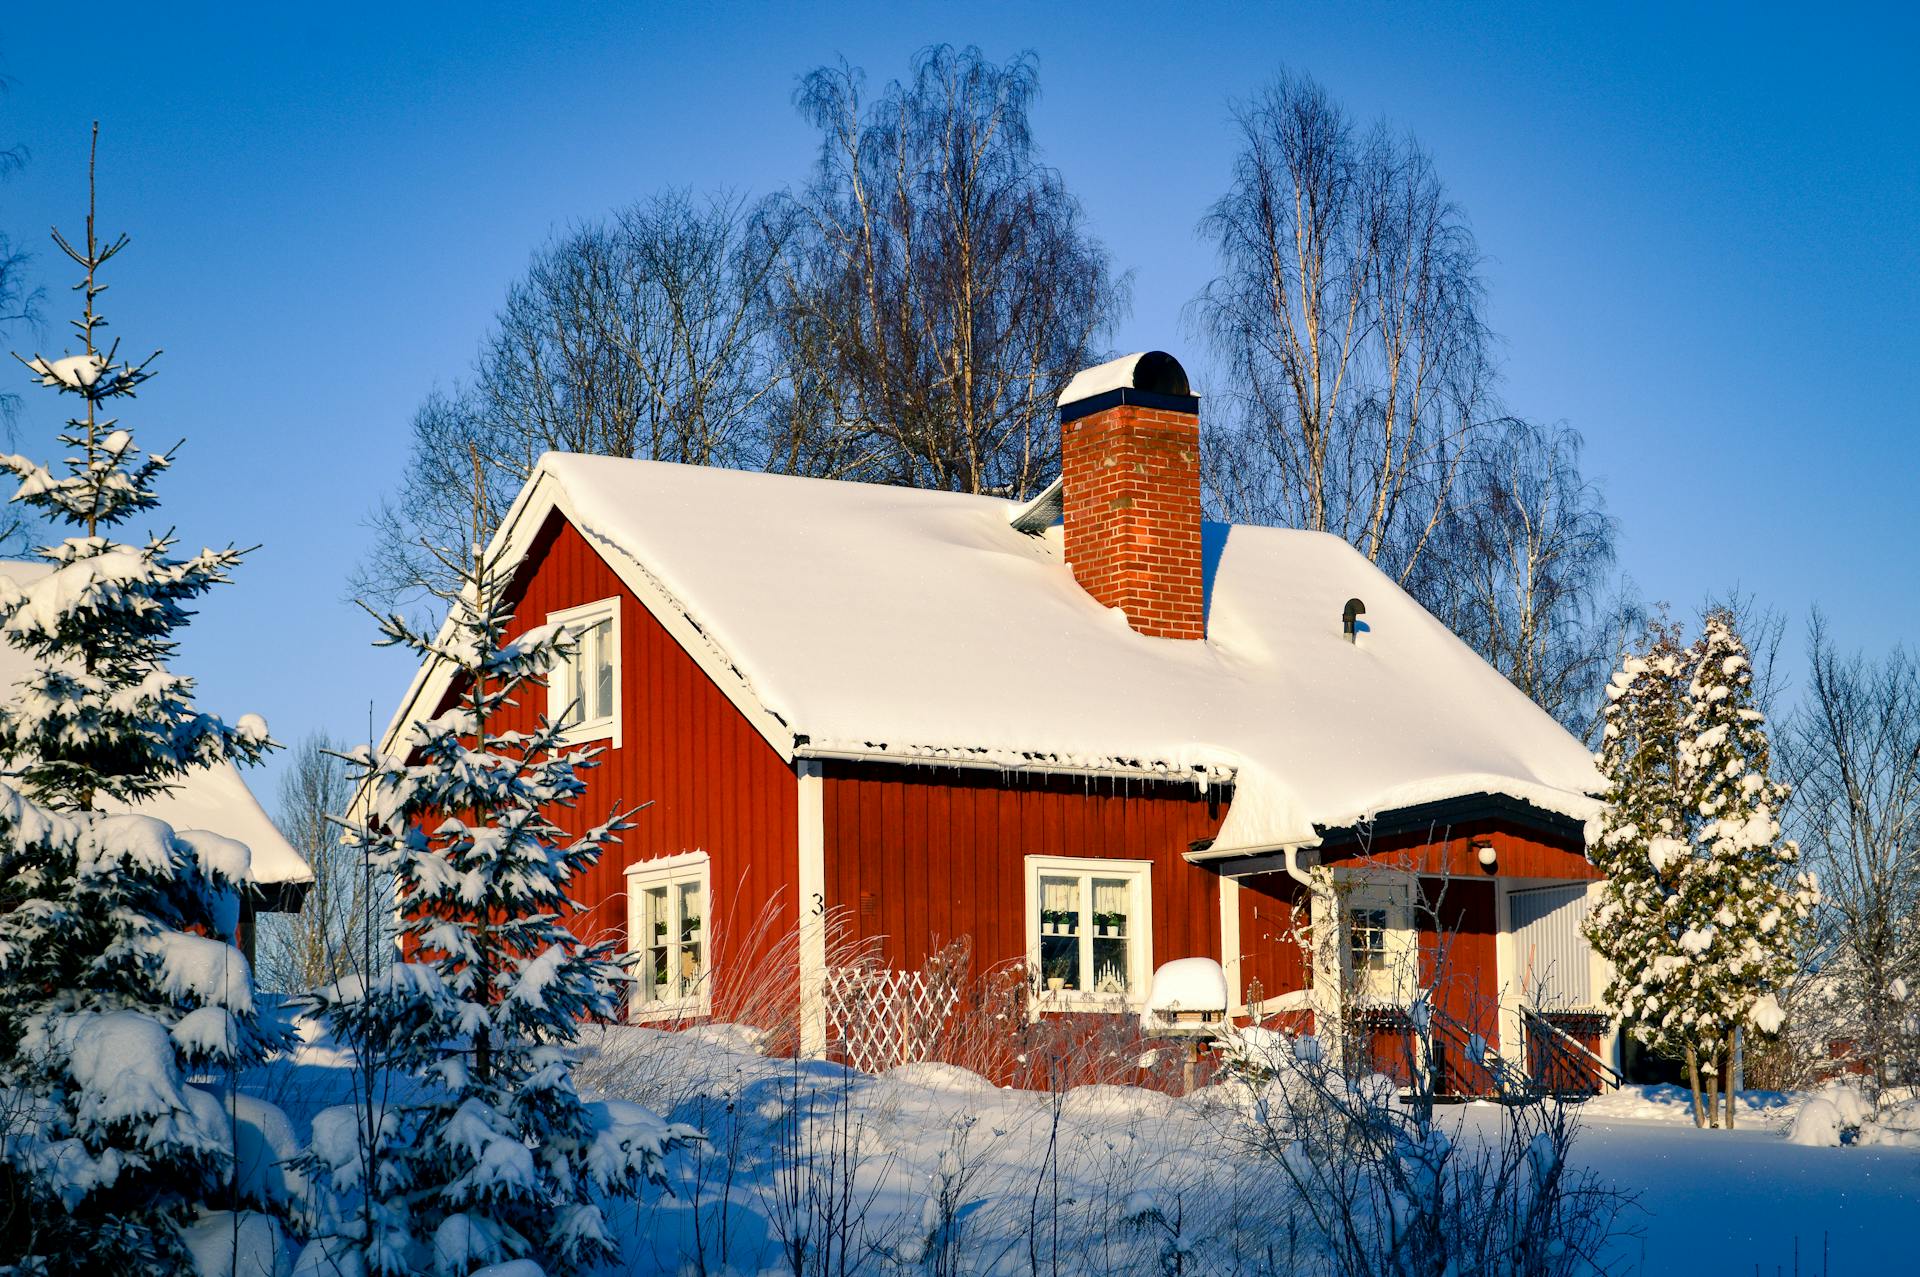 The wilderness cottage during winter, a traditional Swedish cottage.